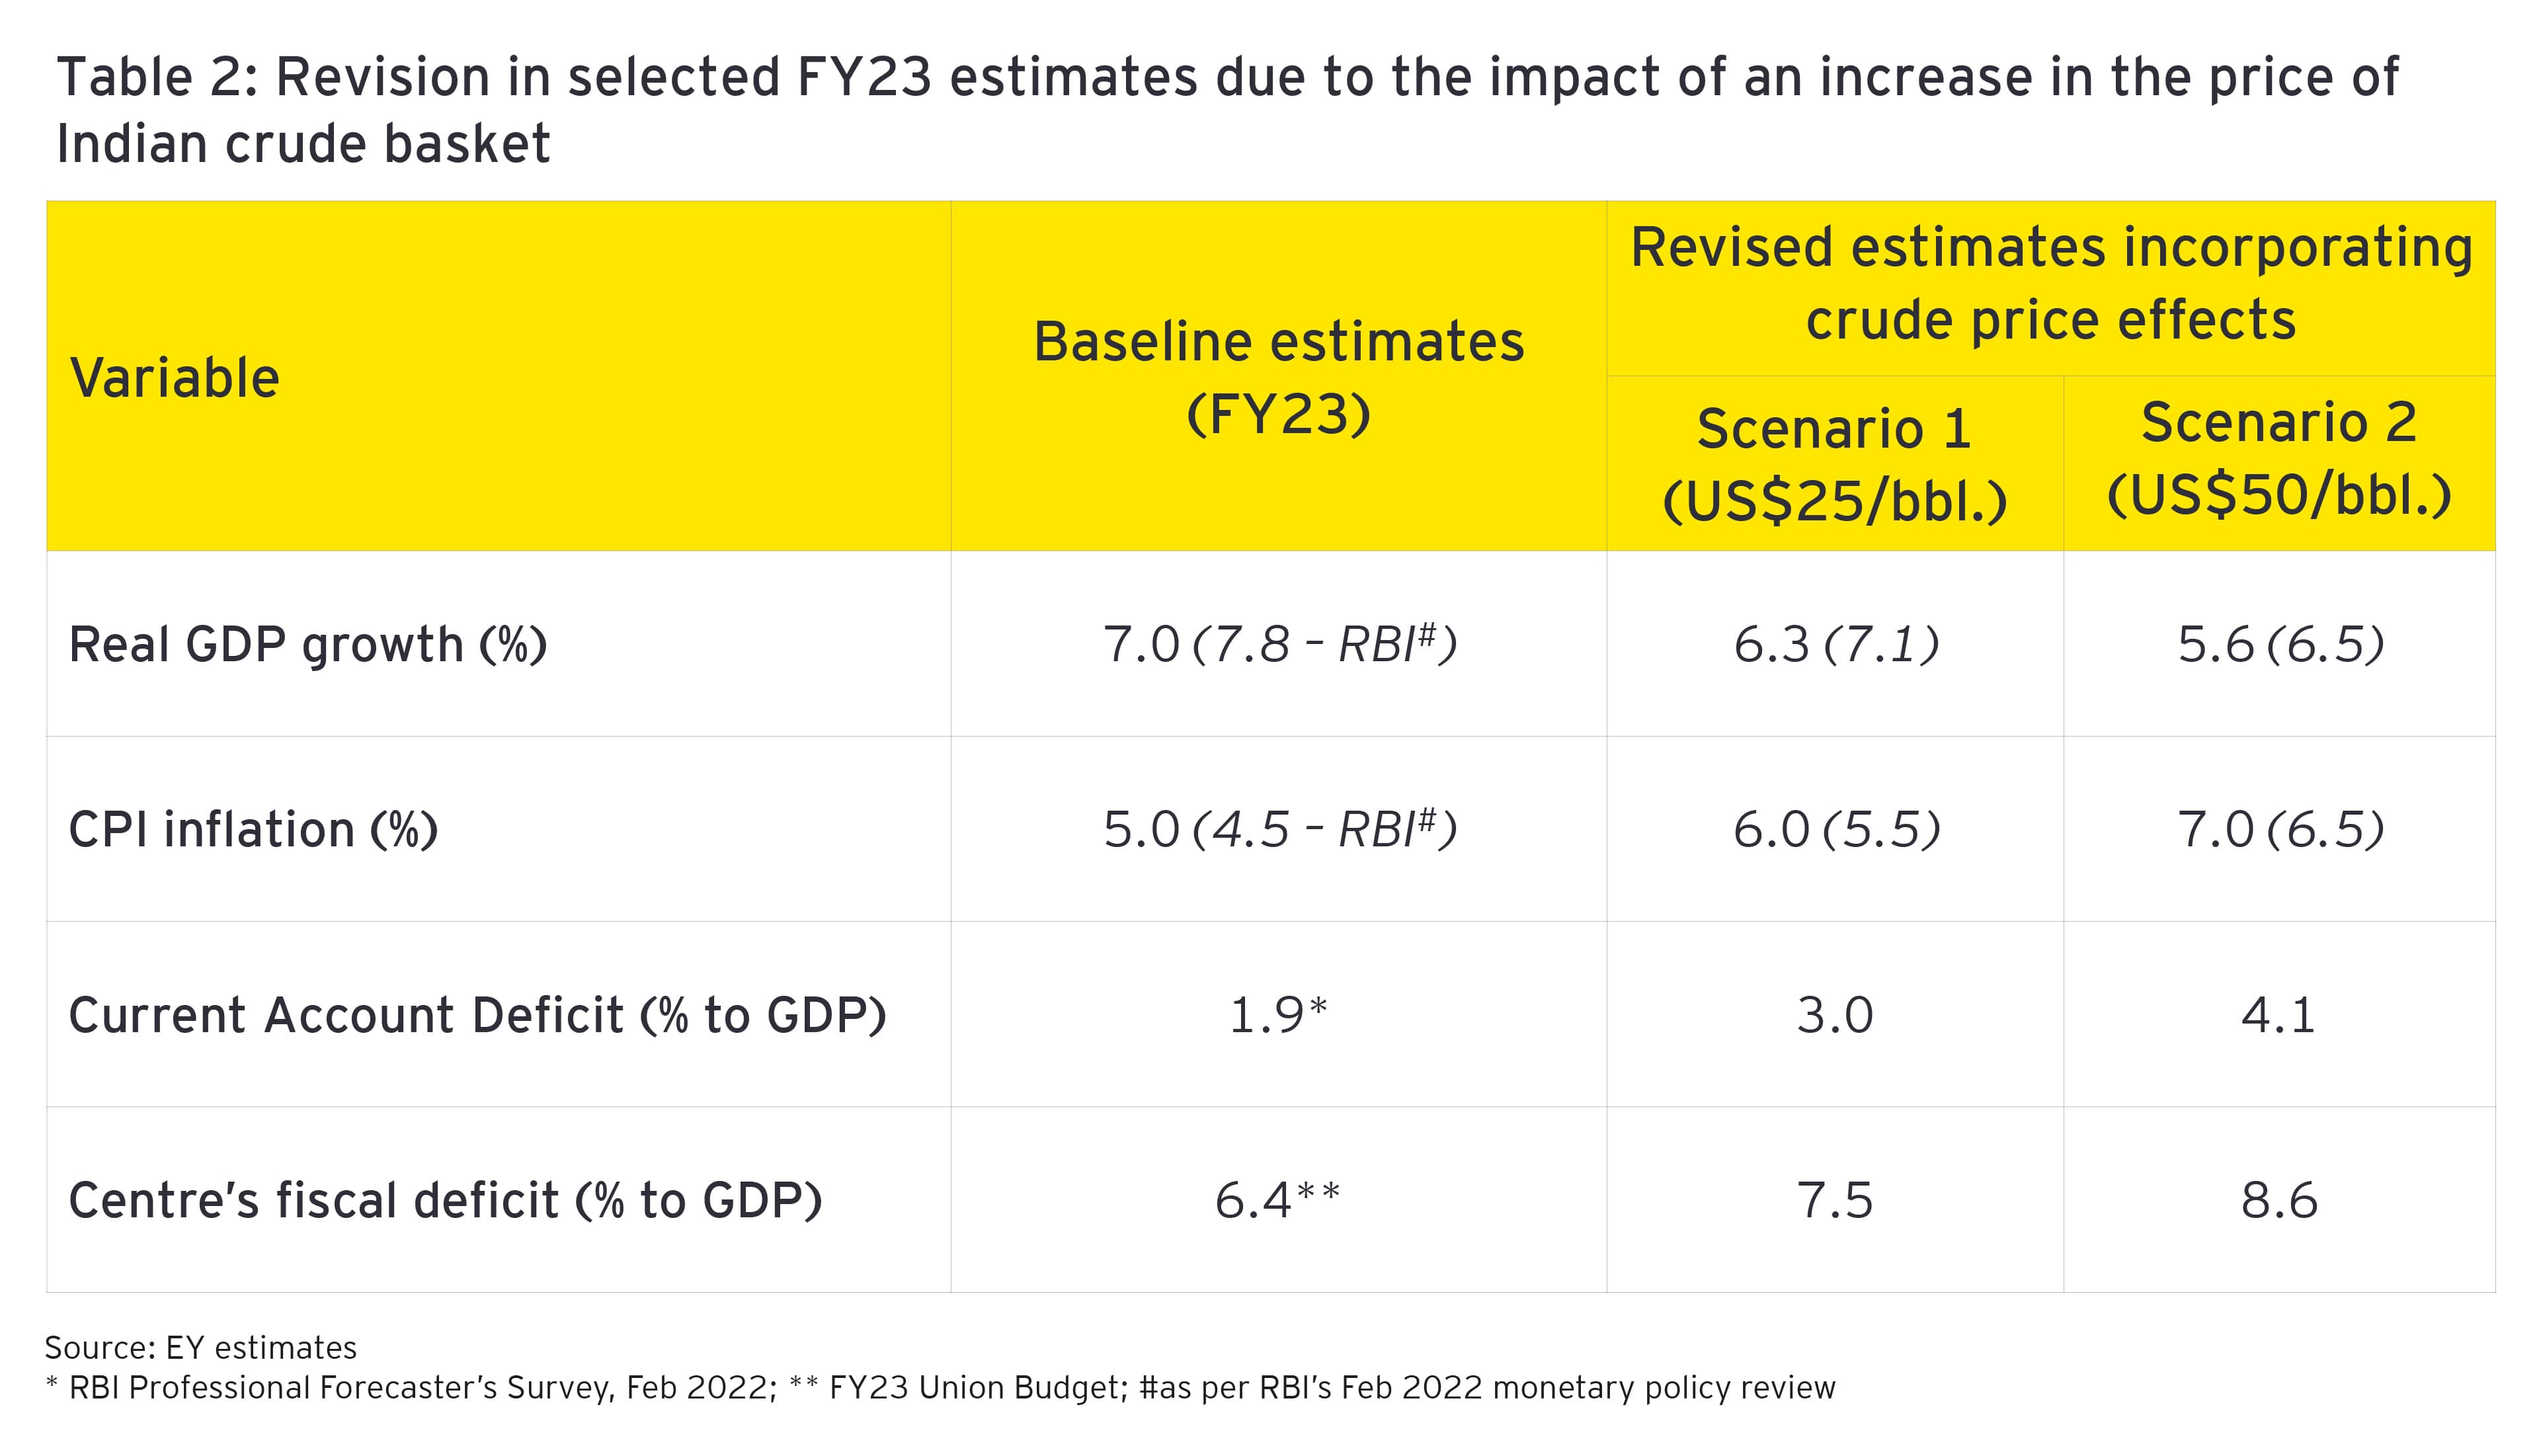 Revision in selected FY23 estimates due to the impact of an increase in the price of Indian crude basket